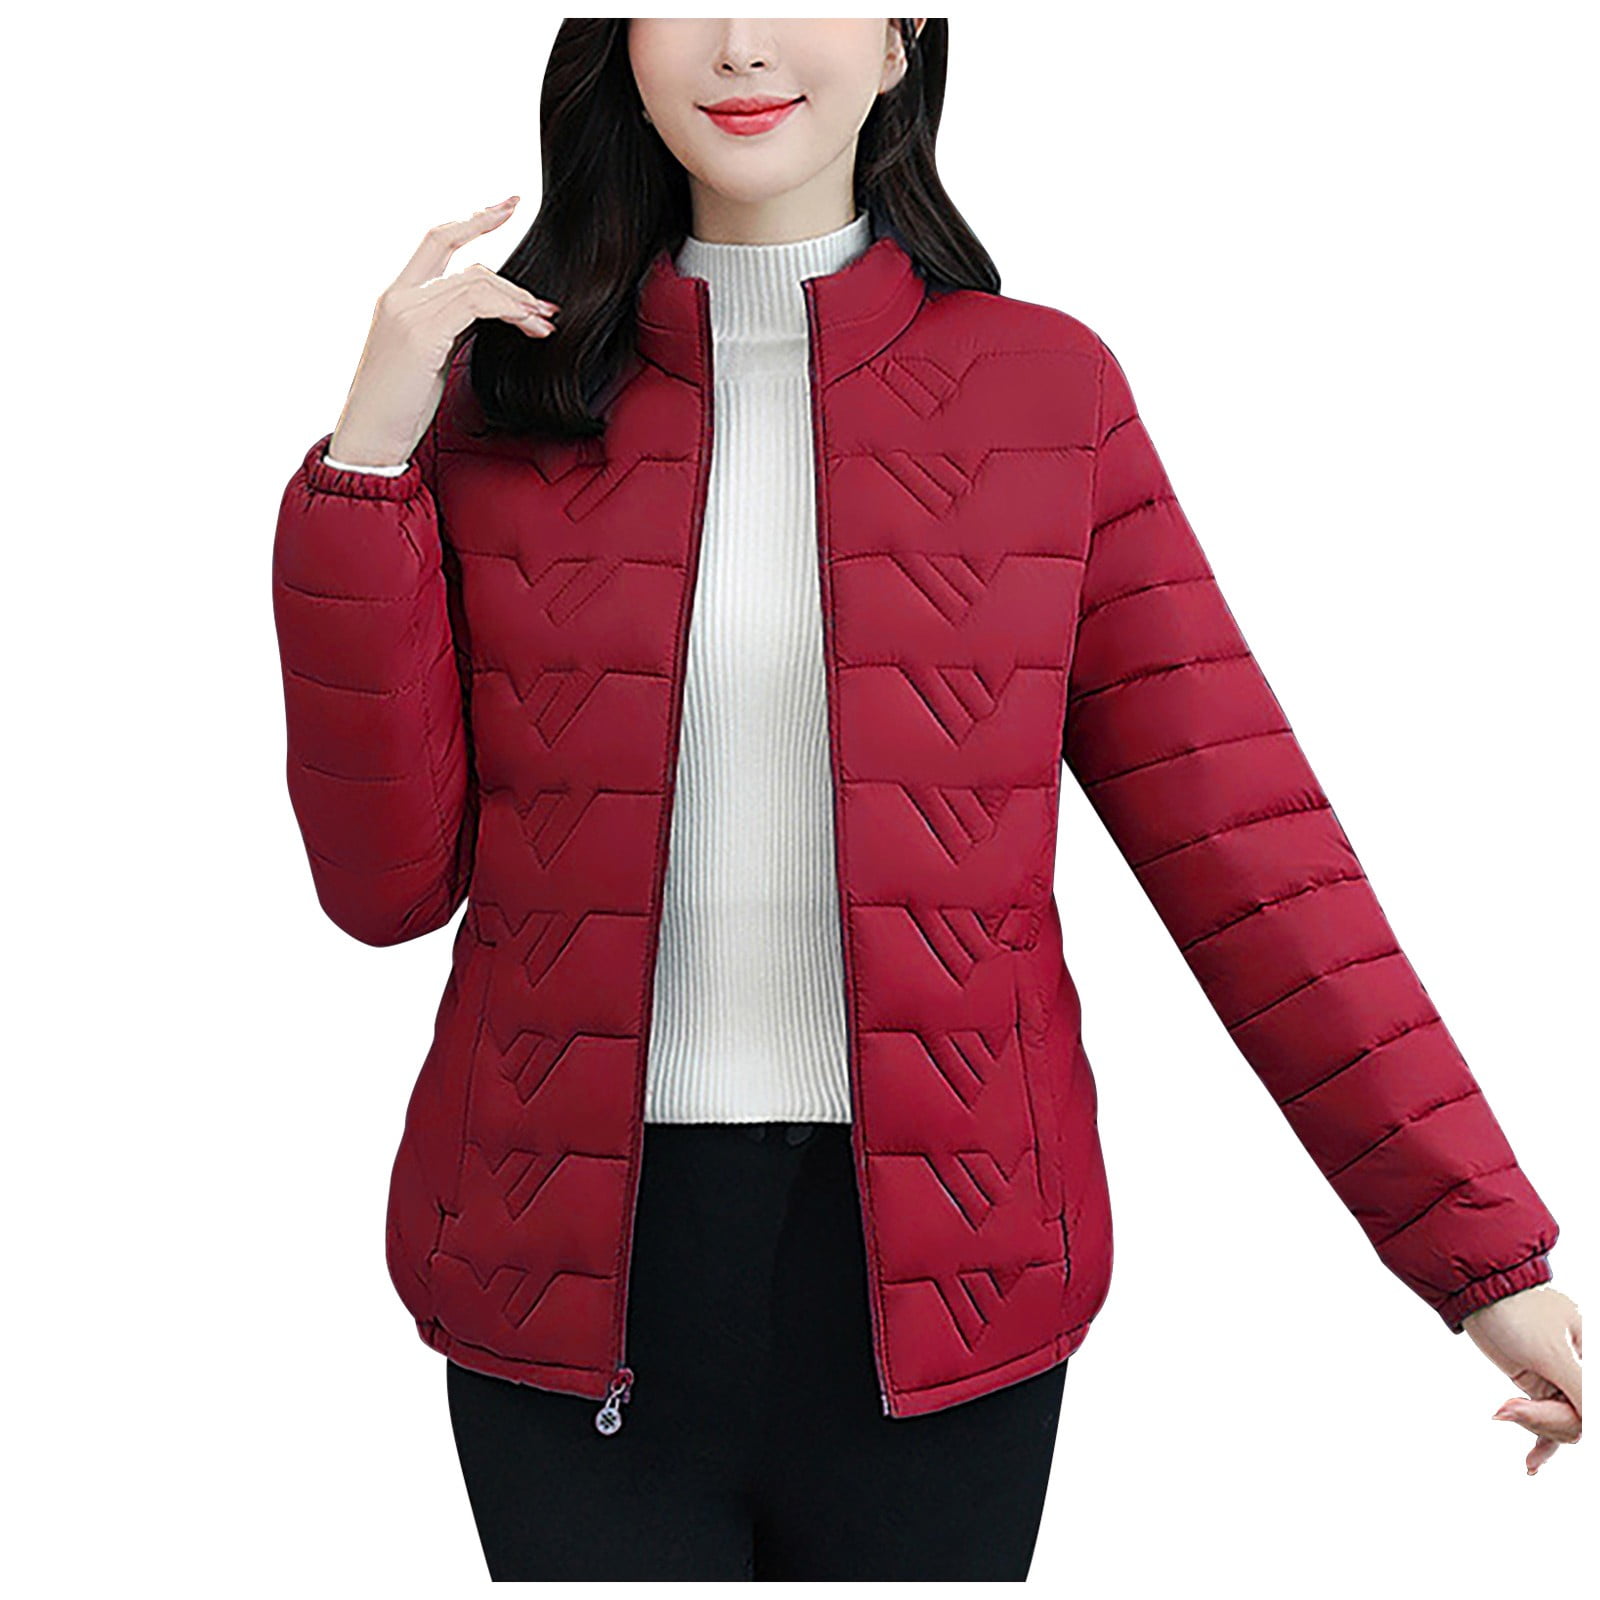 Fashion Jackets Outdoor Jackets redgreen Outdoor Jacket red casual look 